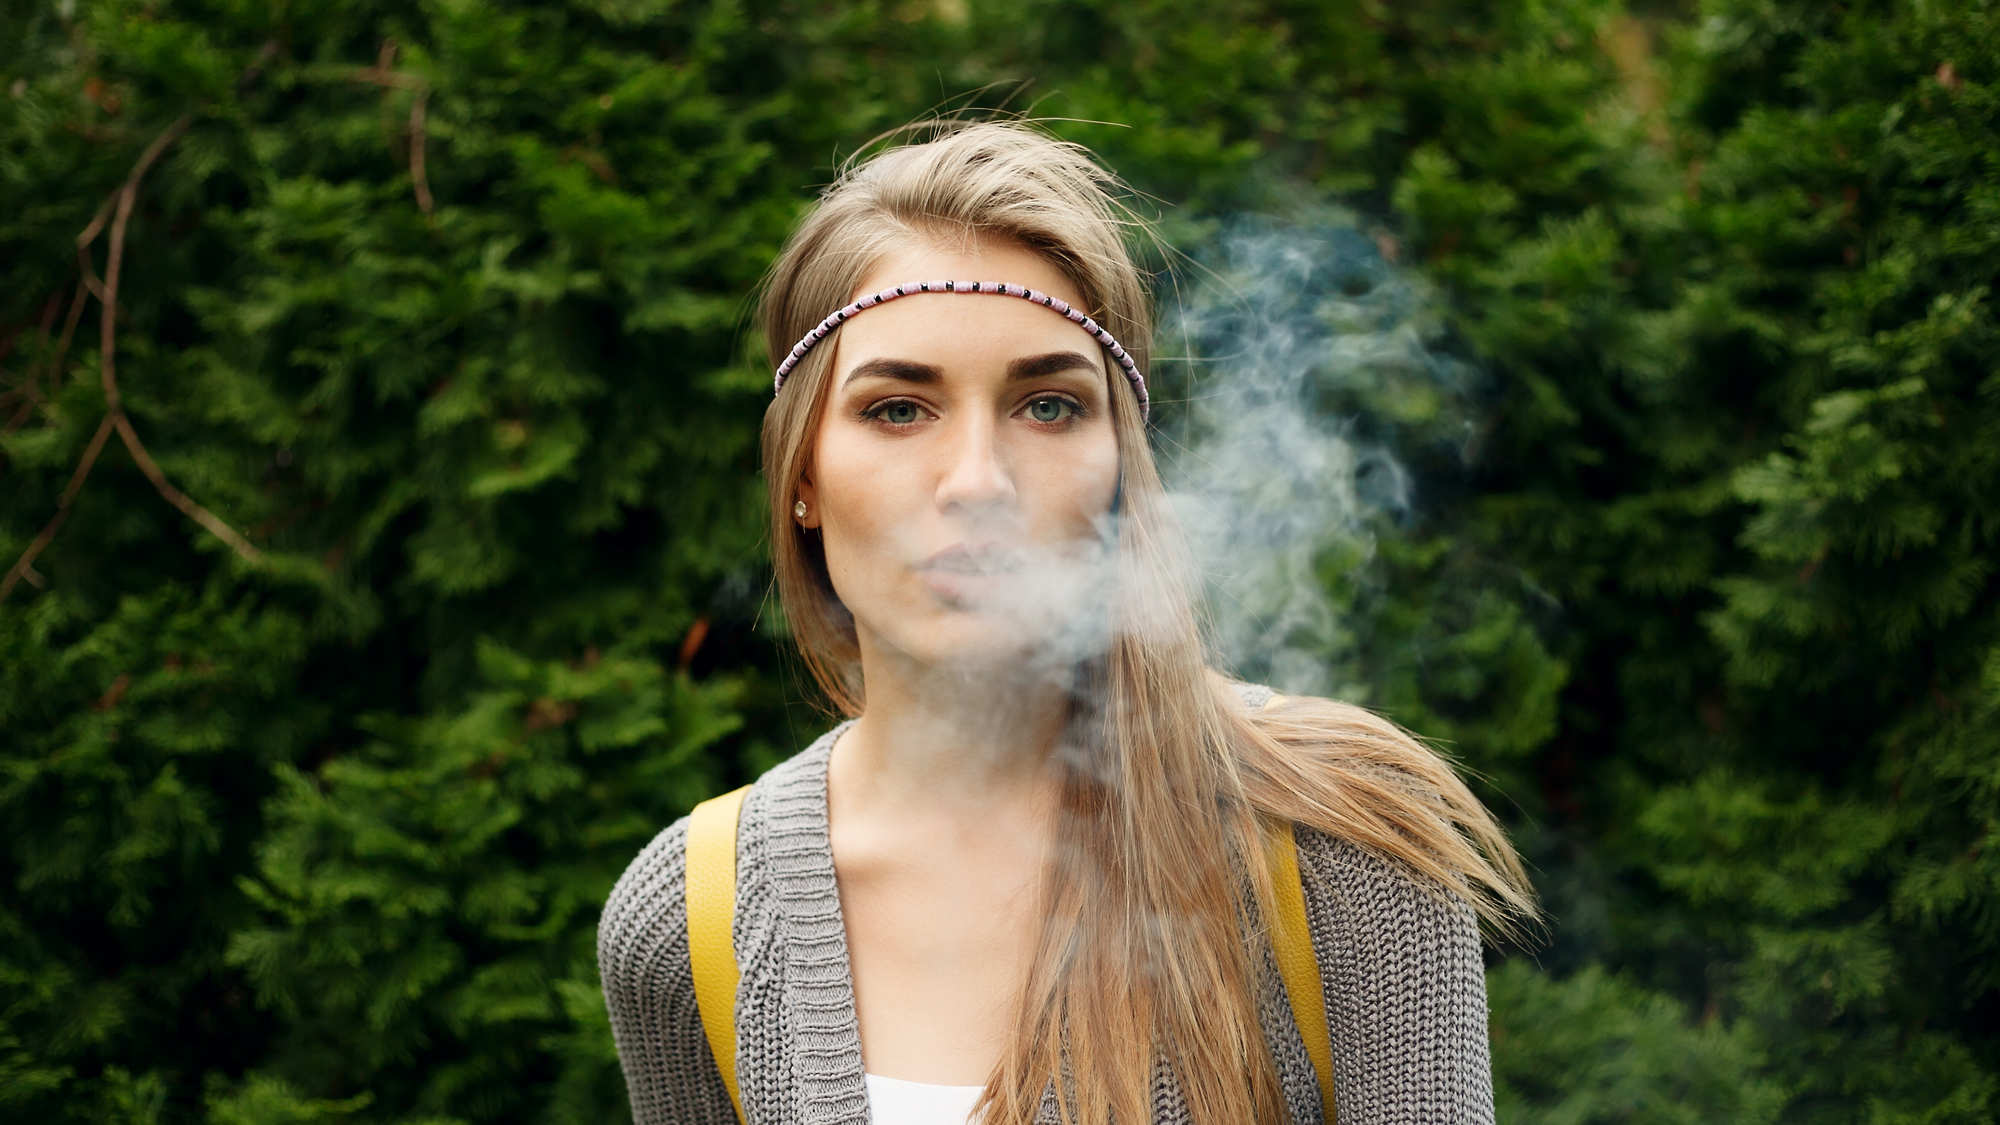 A blonde woman with a headband exhaling smoke outdoors with foliage in the background